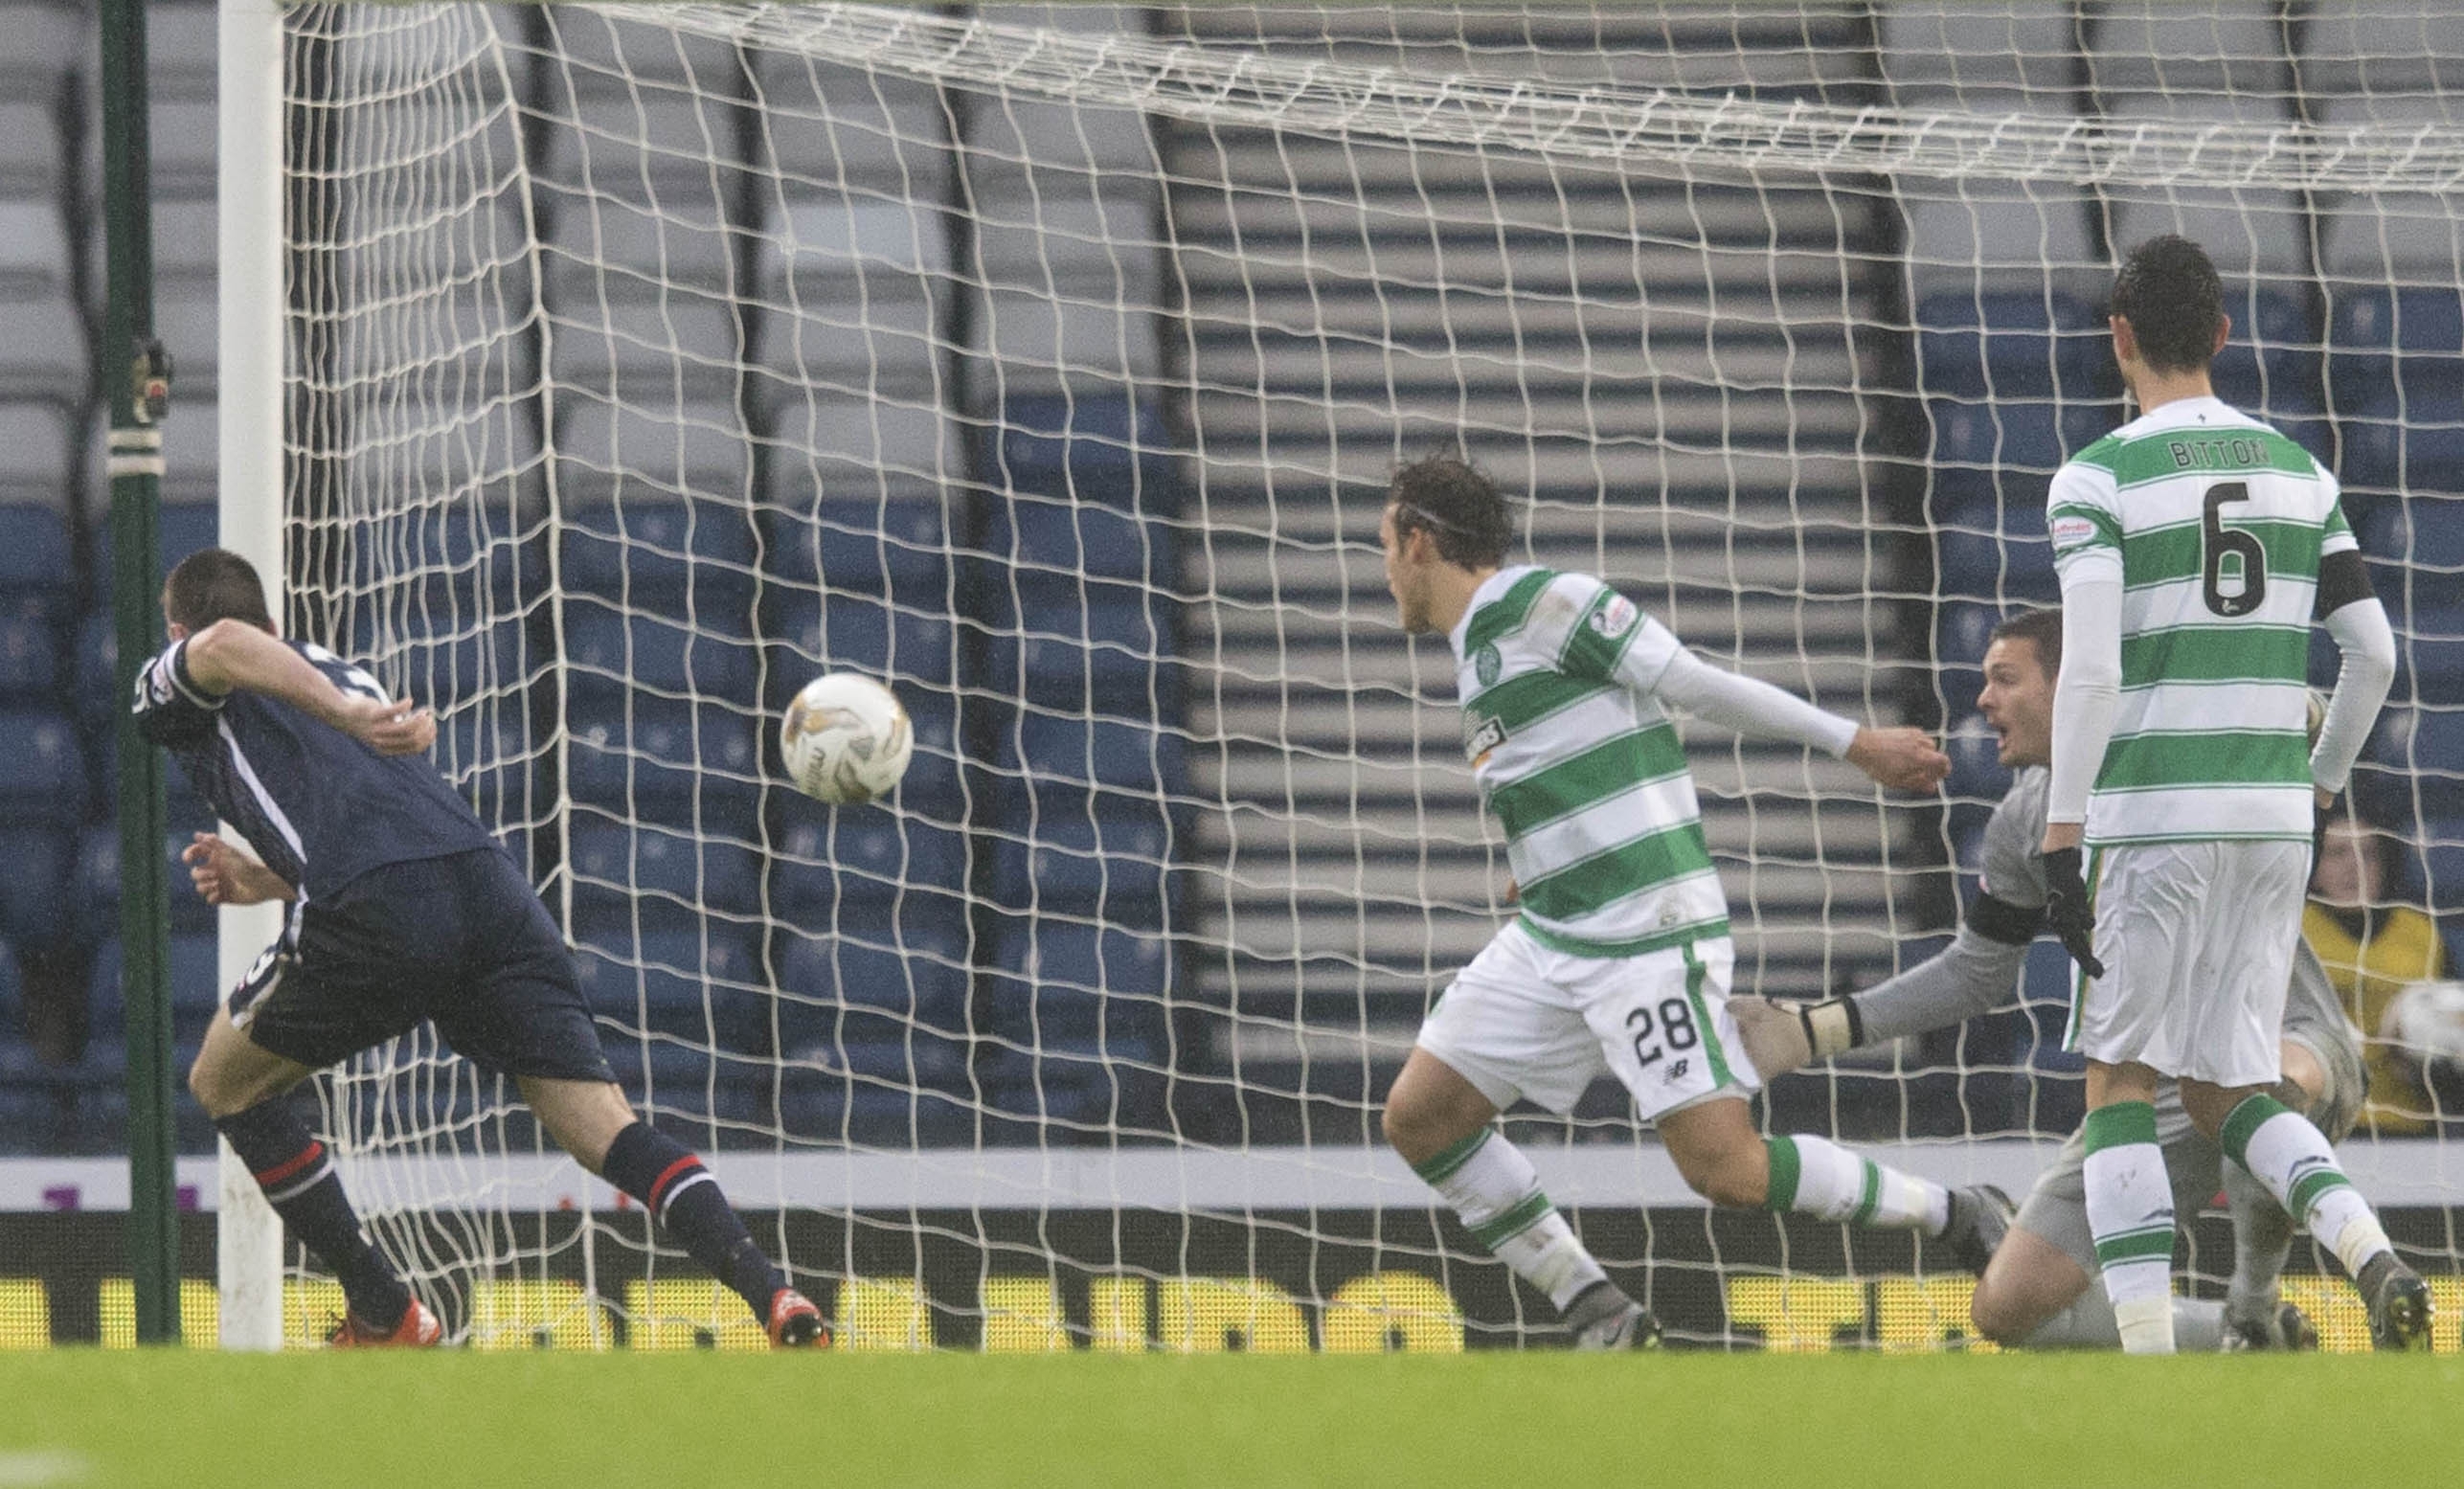 Ross County's Paul Quinn scores his side's second goal of the game 